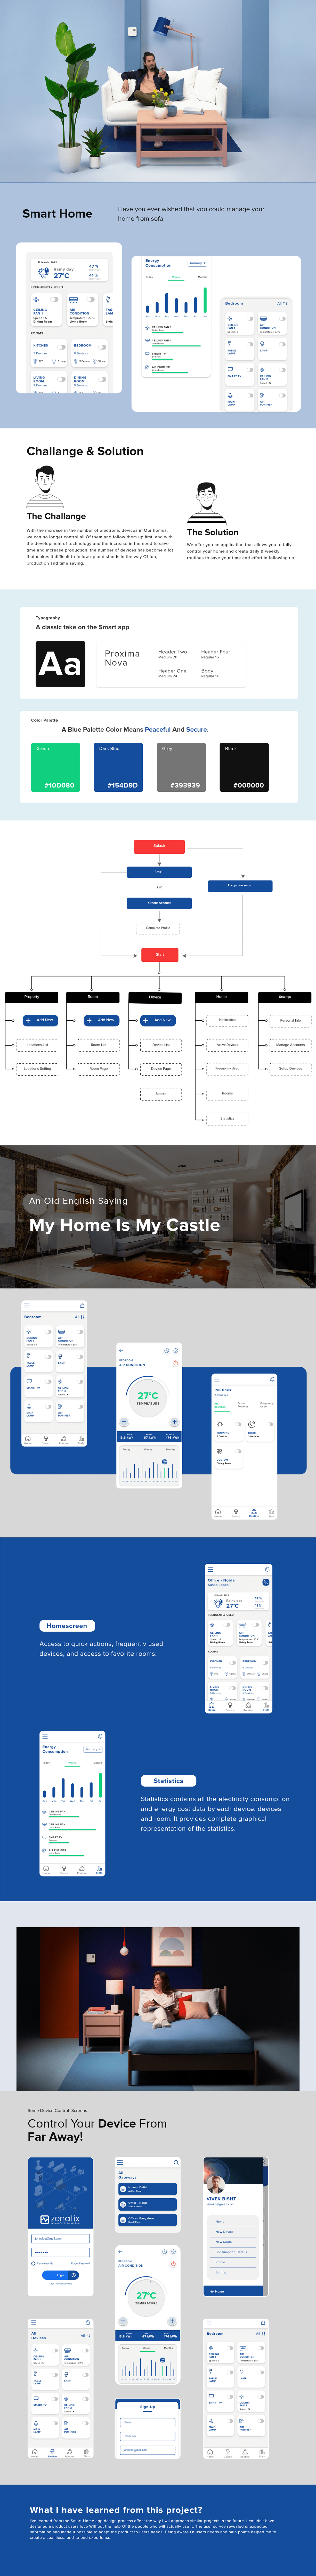 Internet of Things IoT Mobile app Smart Home ui design user experience user interface UX design